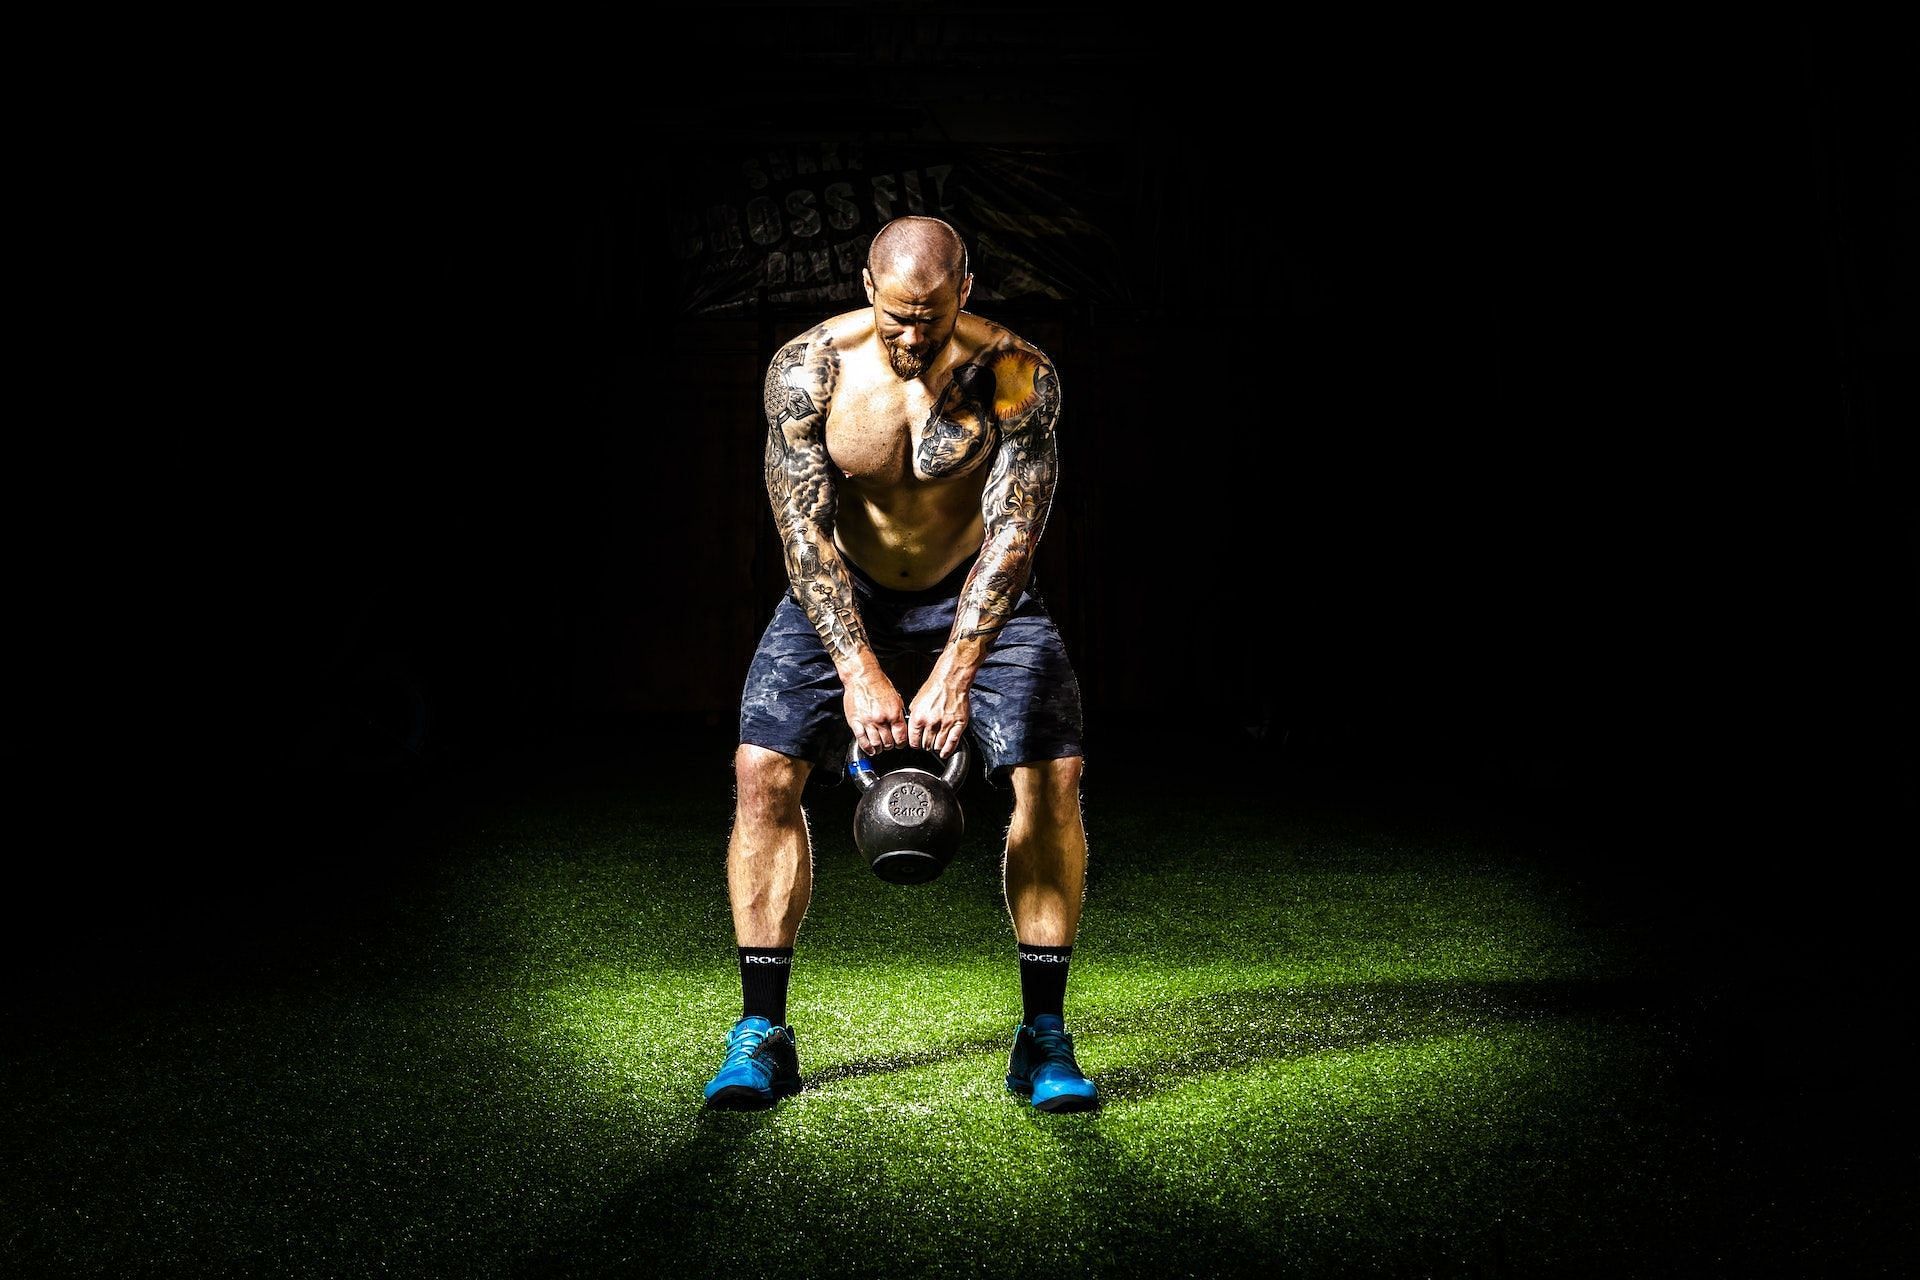 Kettlebell goblet squats are one of the best full body kettlebell workouts. (Photo via Pexels/Binyamin Mellish)